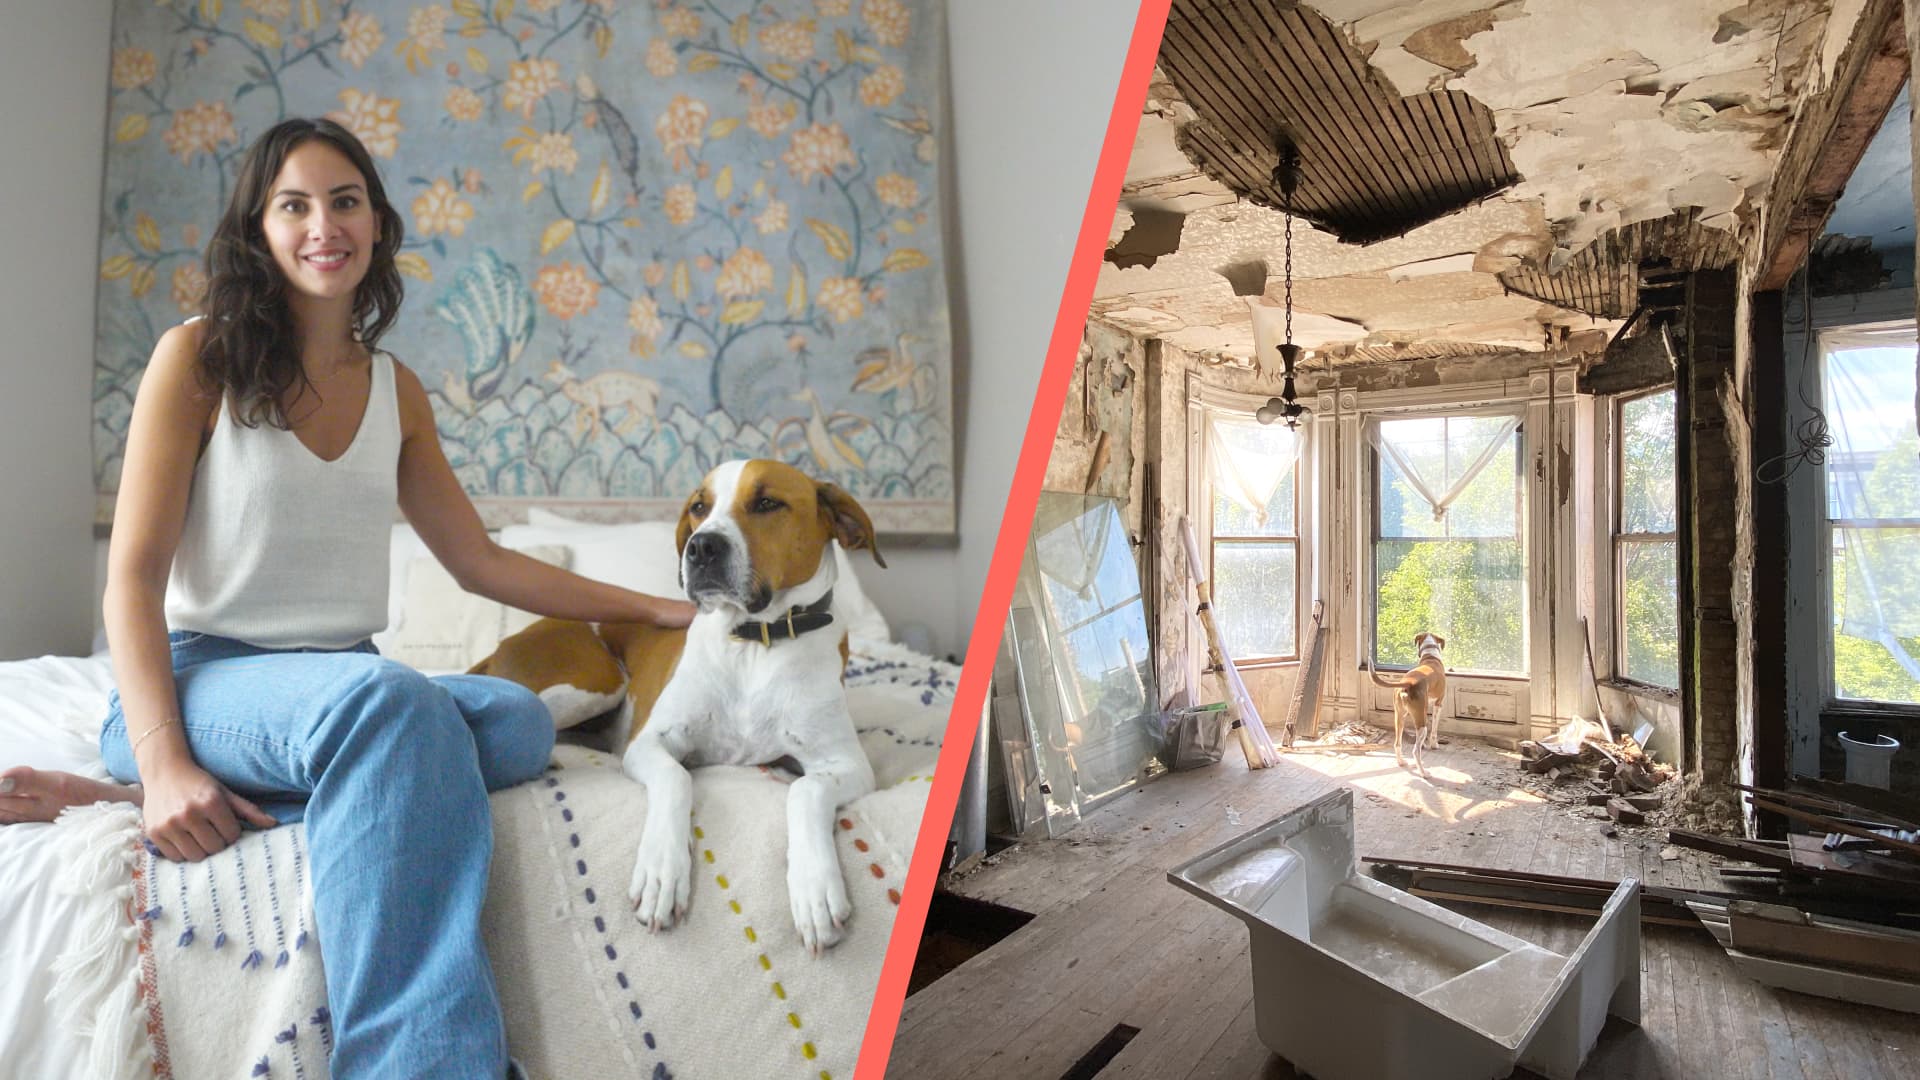 She bought this abandoned residence for $16,500—and entirely renovated it. Now she will pay $1,047/month to are residing in it